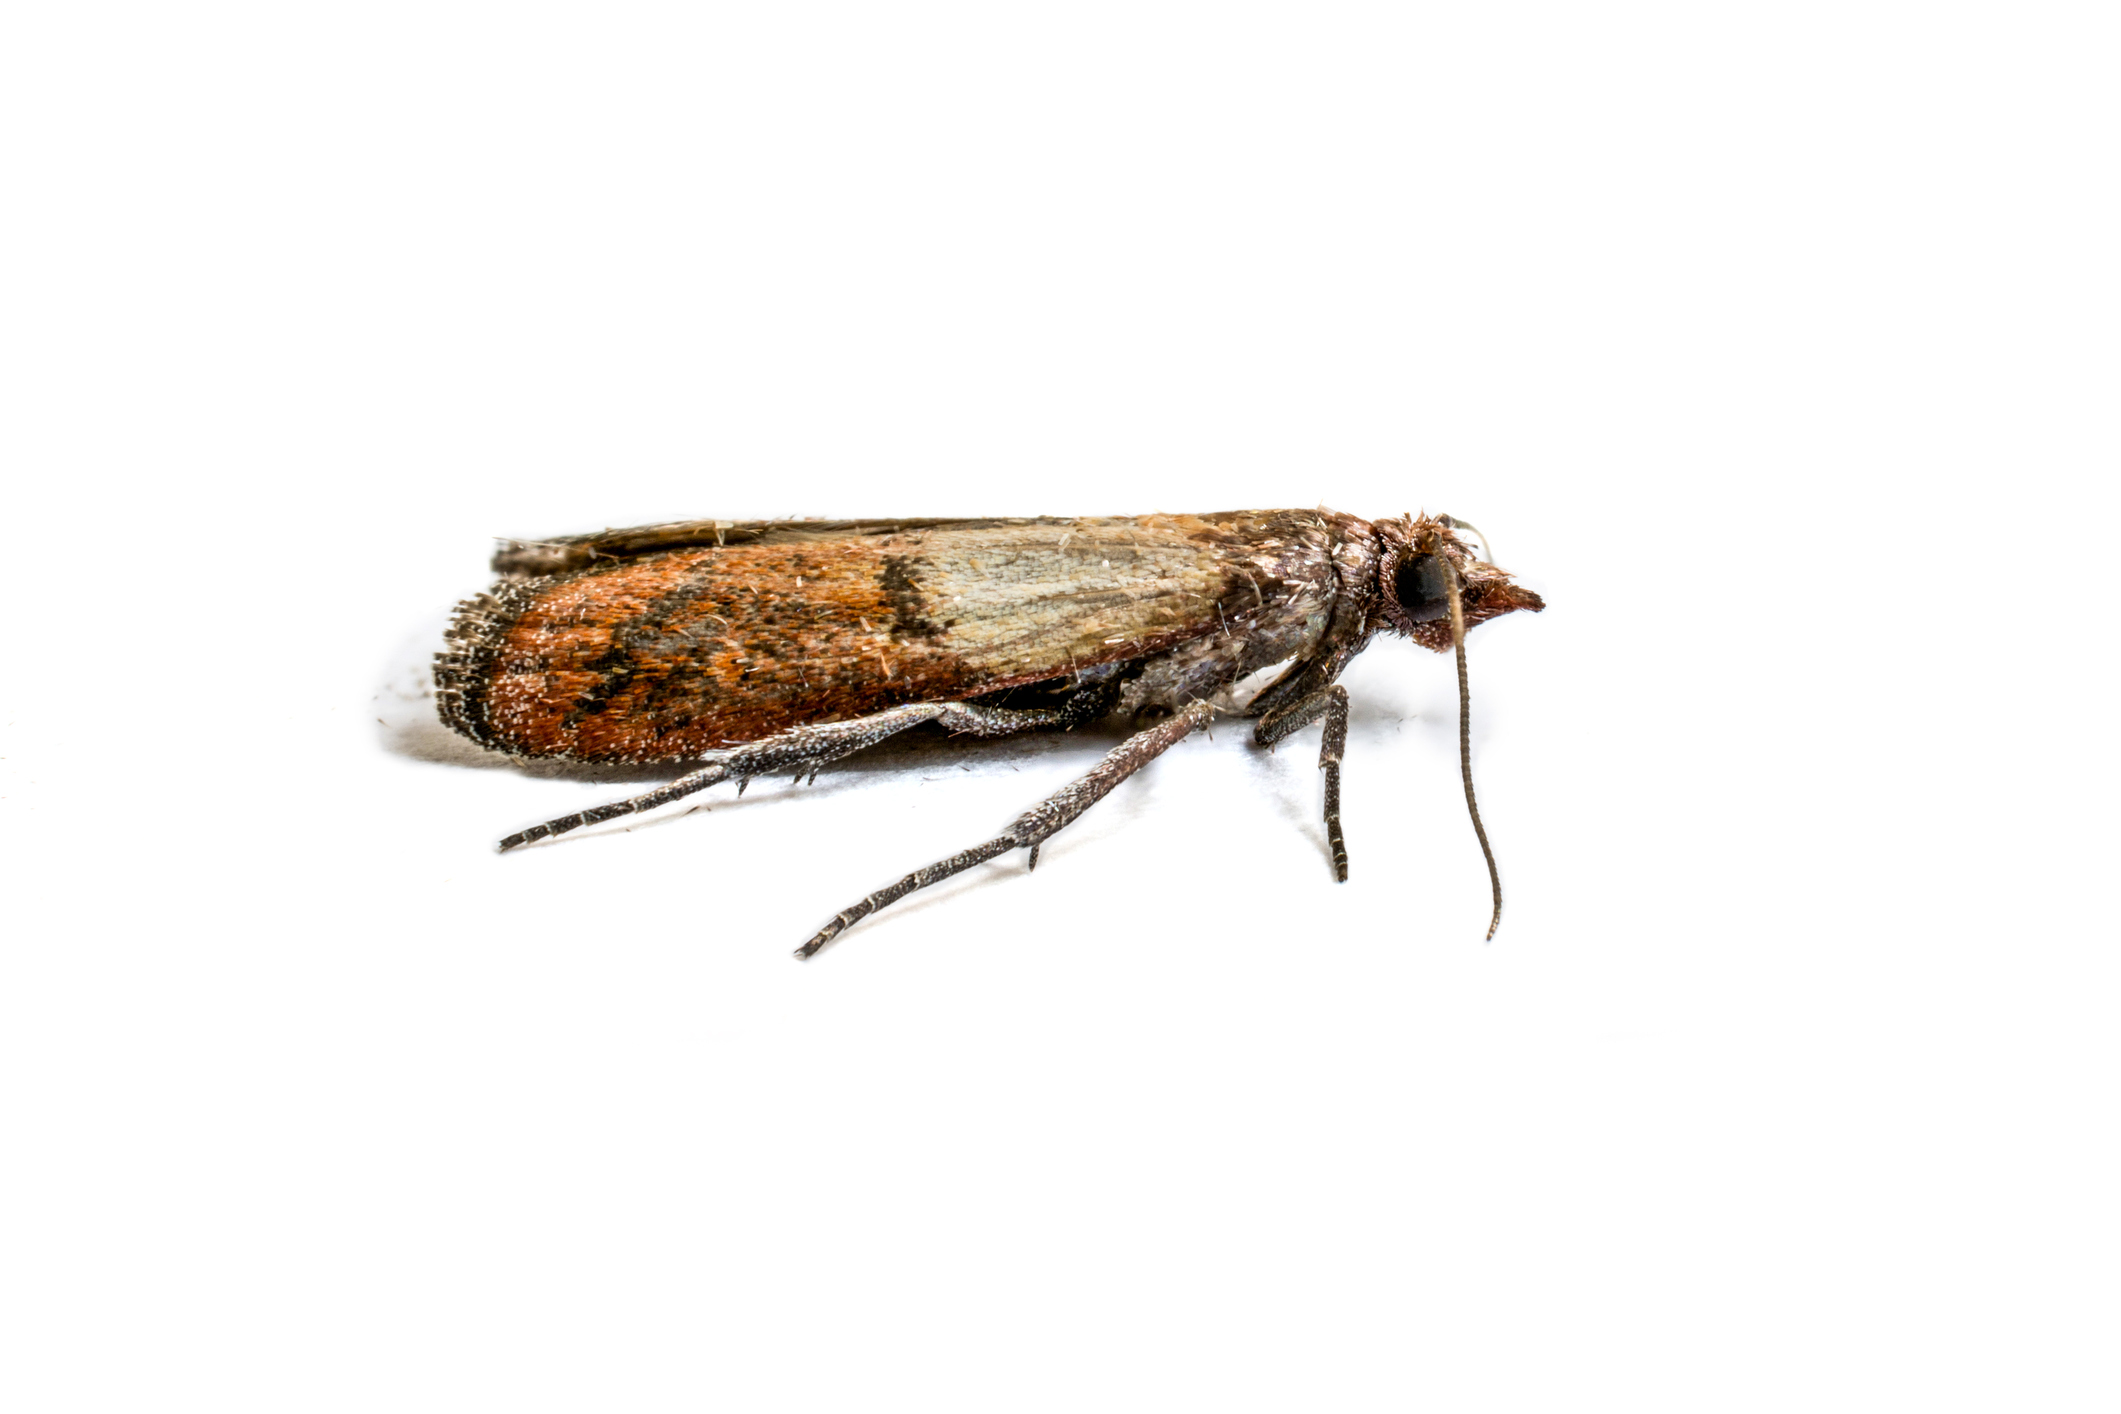 Indianmeal moths